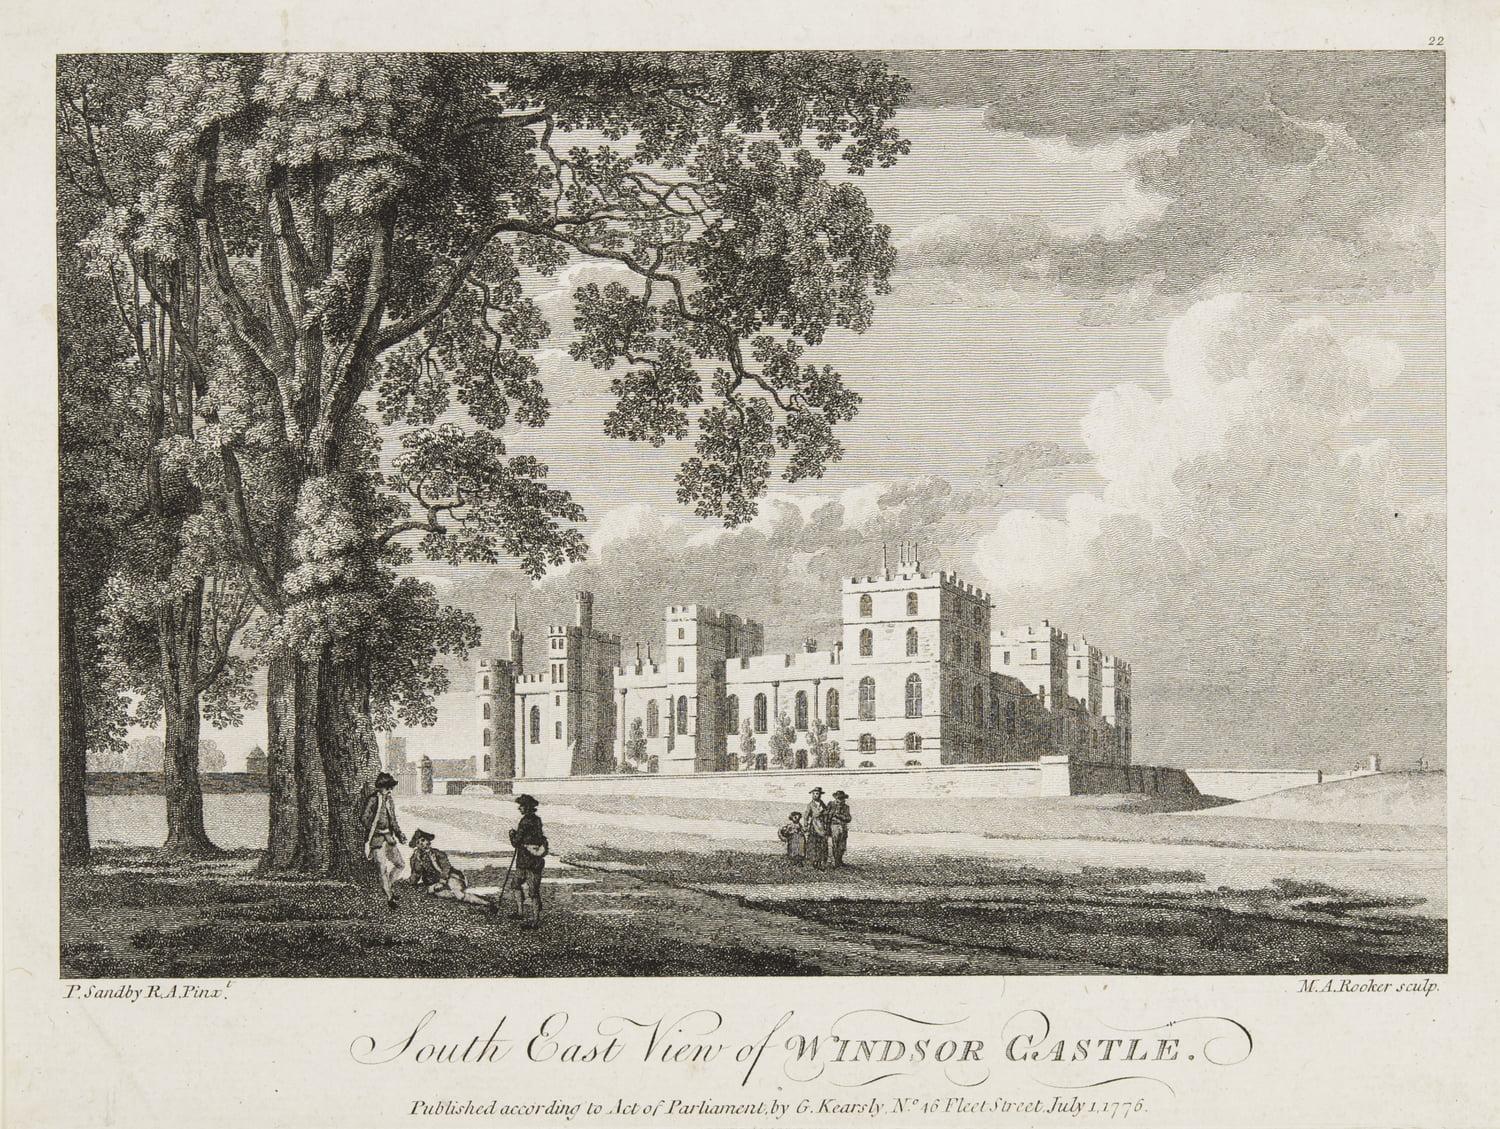 South East View Of Windsor